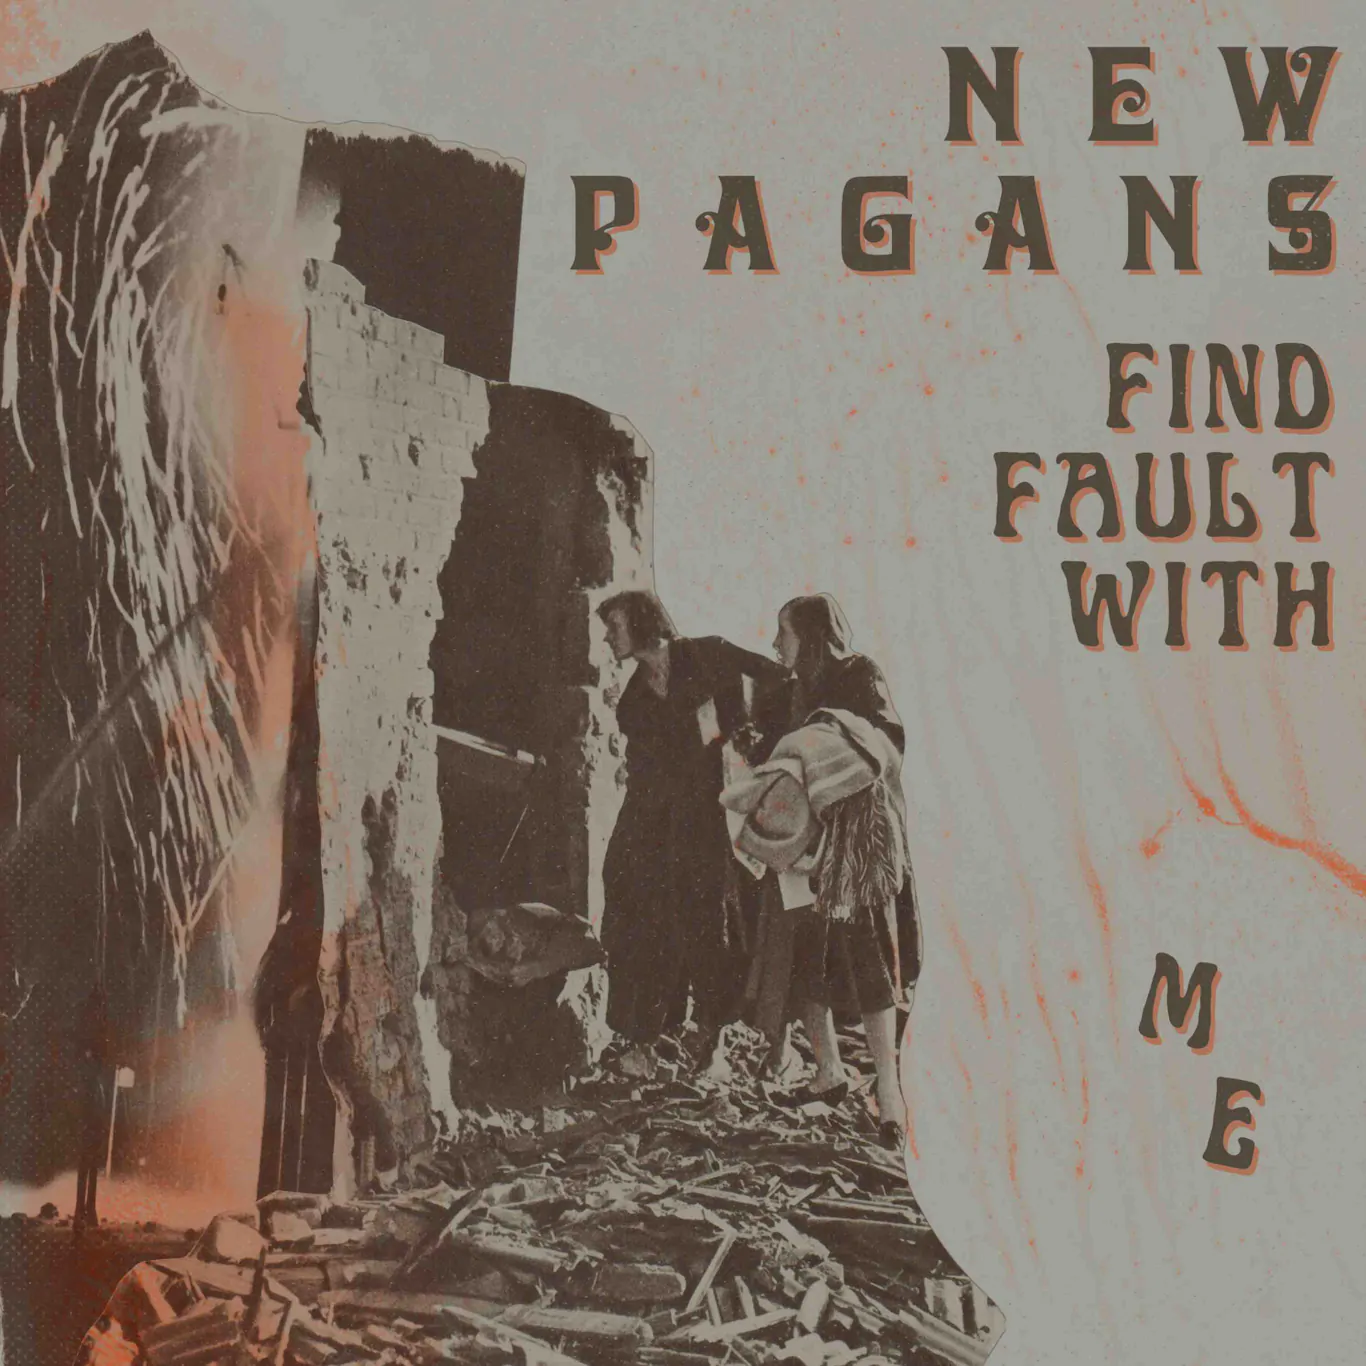 NEW PAGANS release video for new single ‘Find Fault With Me’ – Watch Now